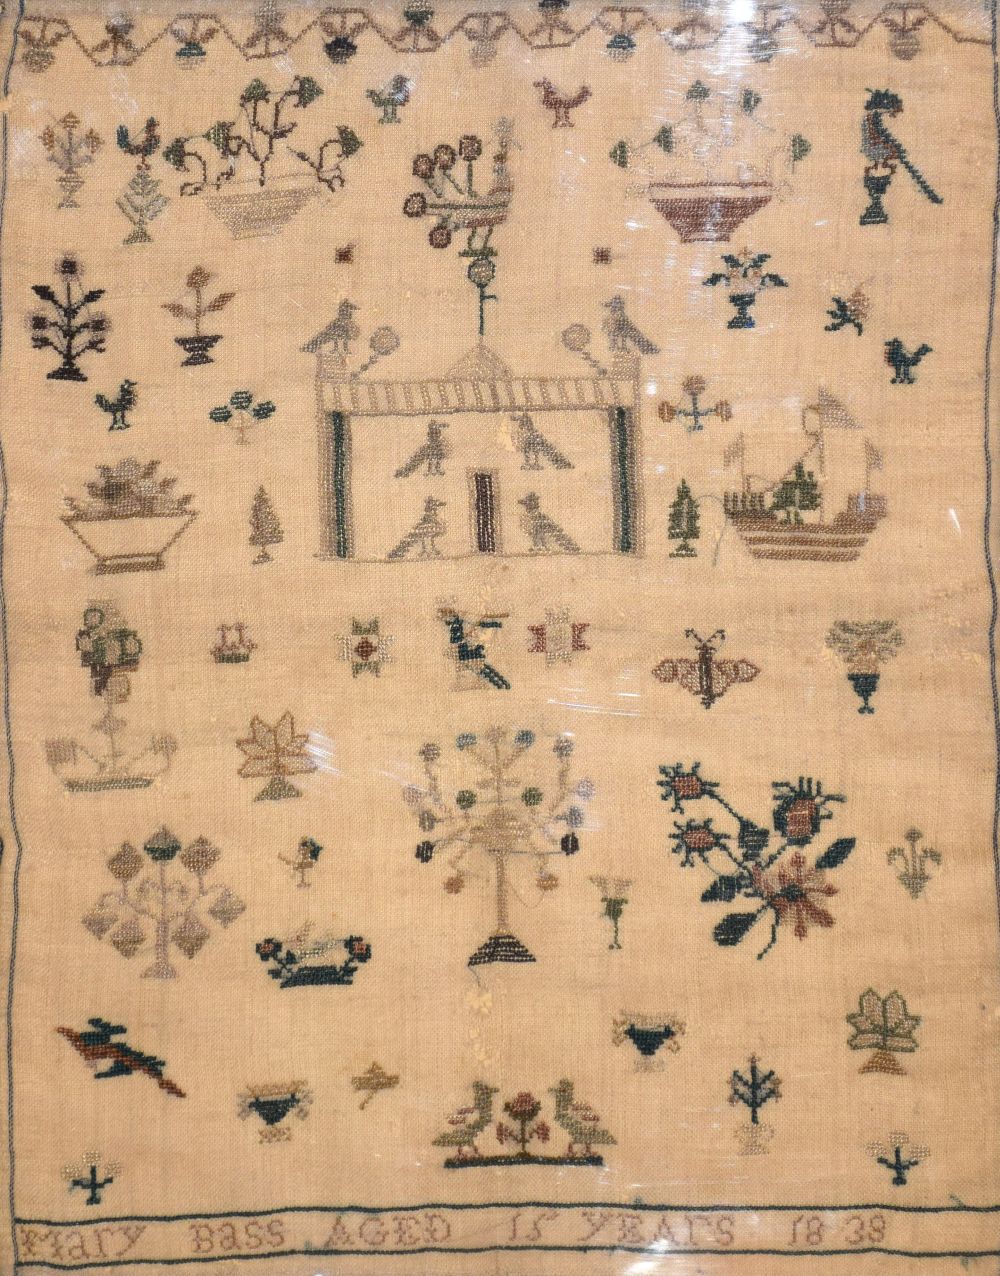 Needlework sampler worked in petit point by Mary Bass, 1838, 42.5cm x 34cm Condition: Some holes